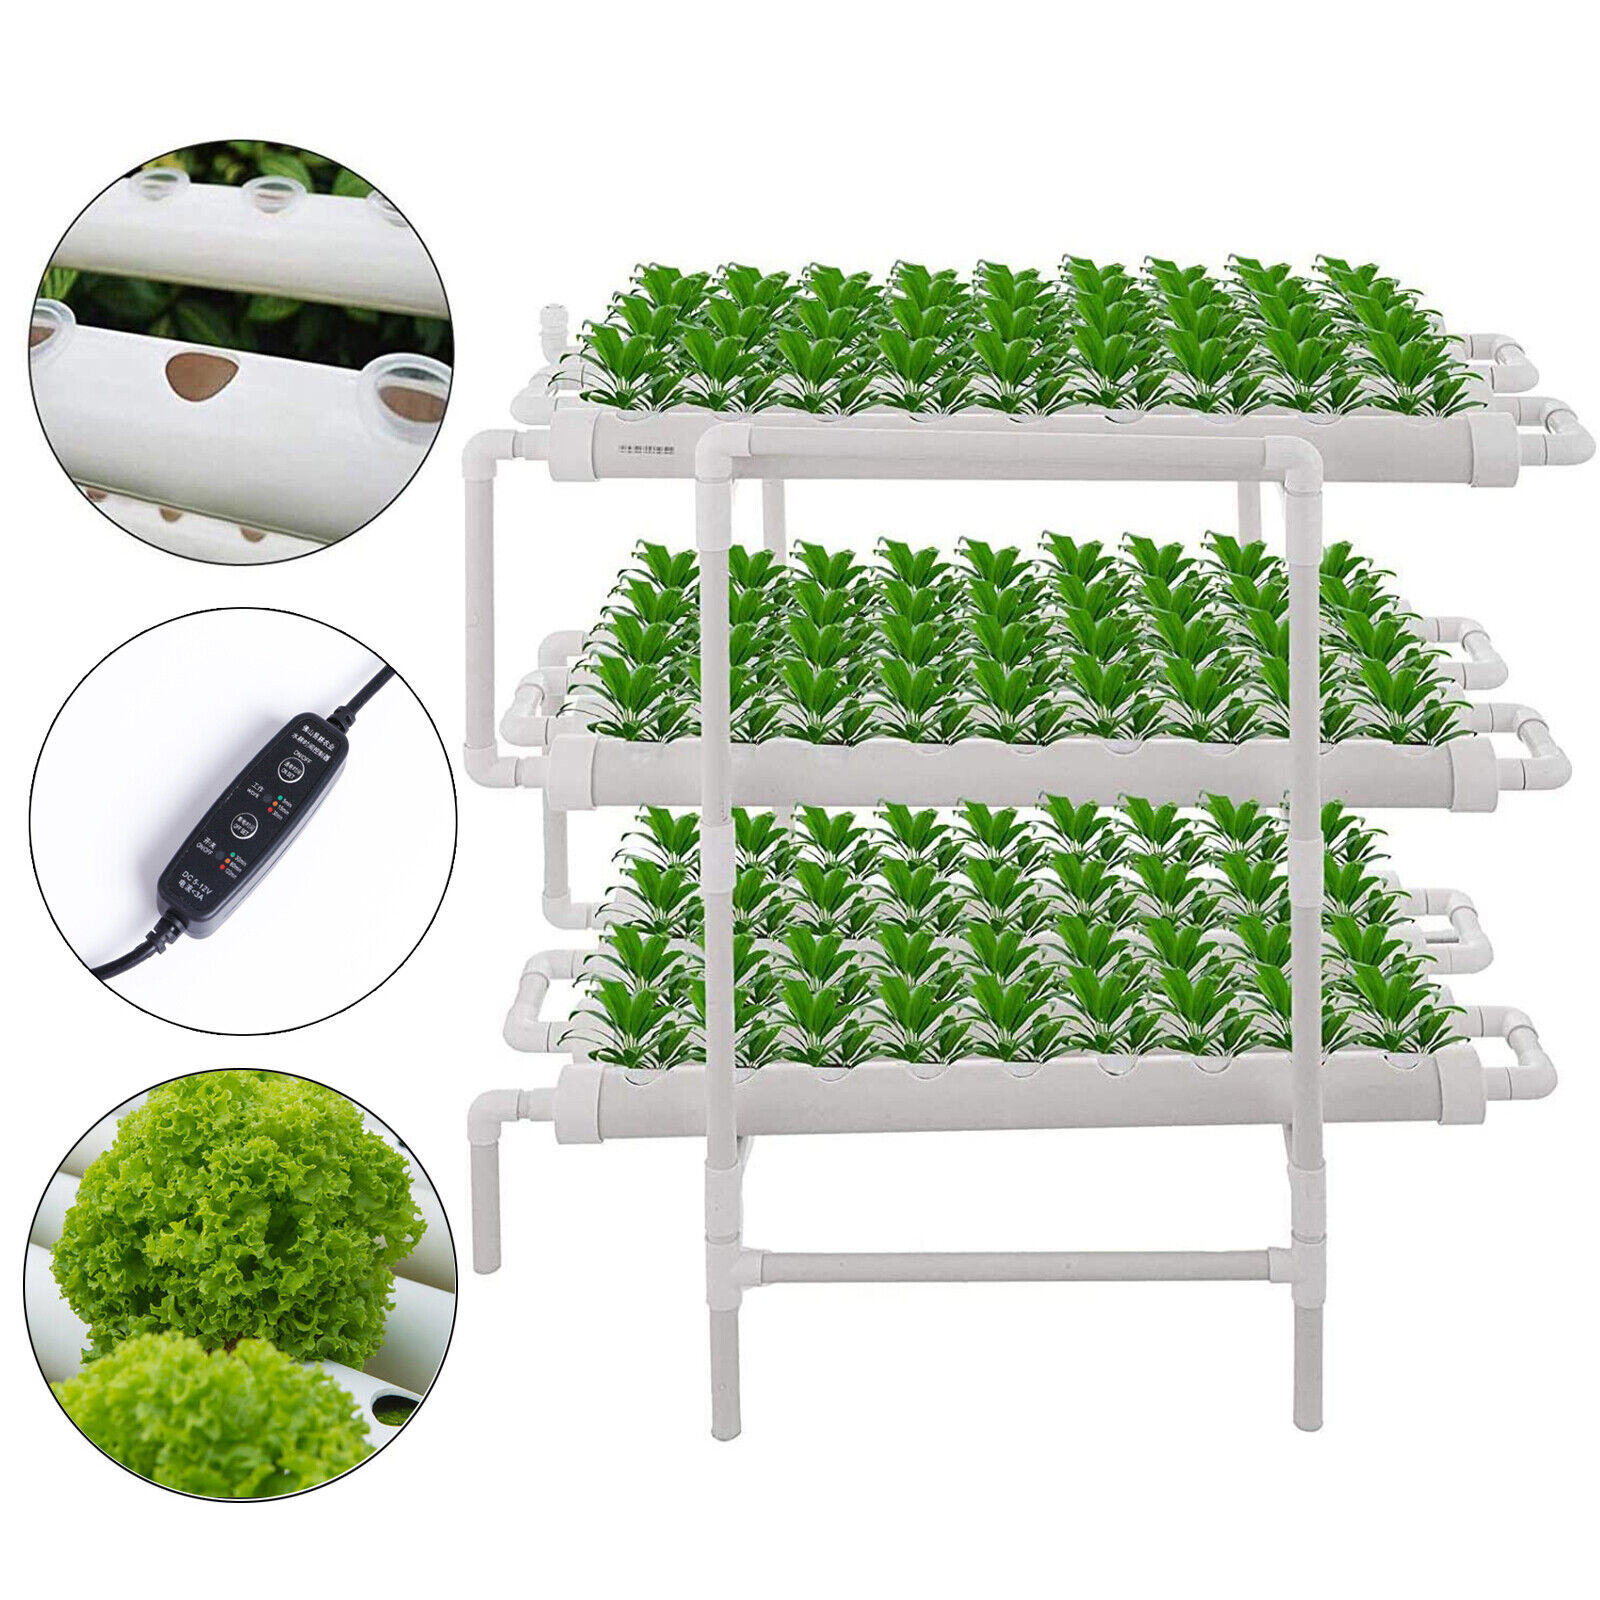 Hydroponic Grow Kit 3 Layer 108 Plant Sites 12 Pipes With Timer Garden Vegetable